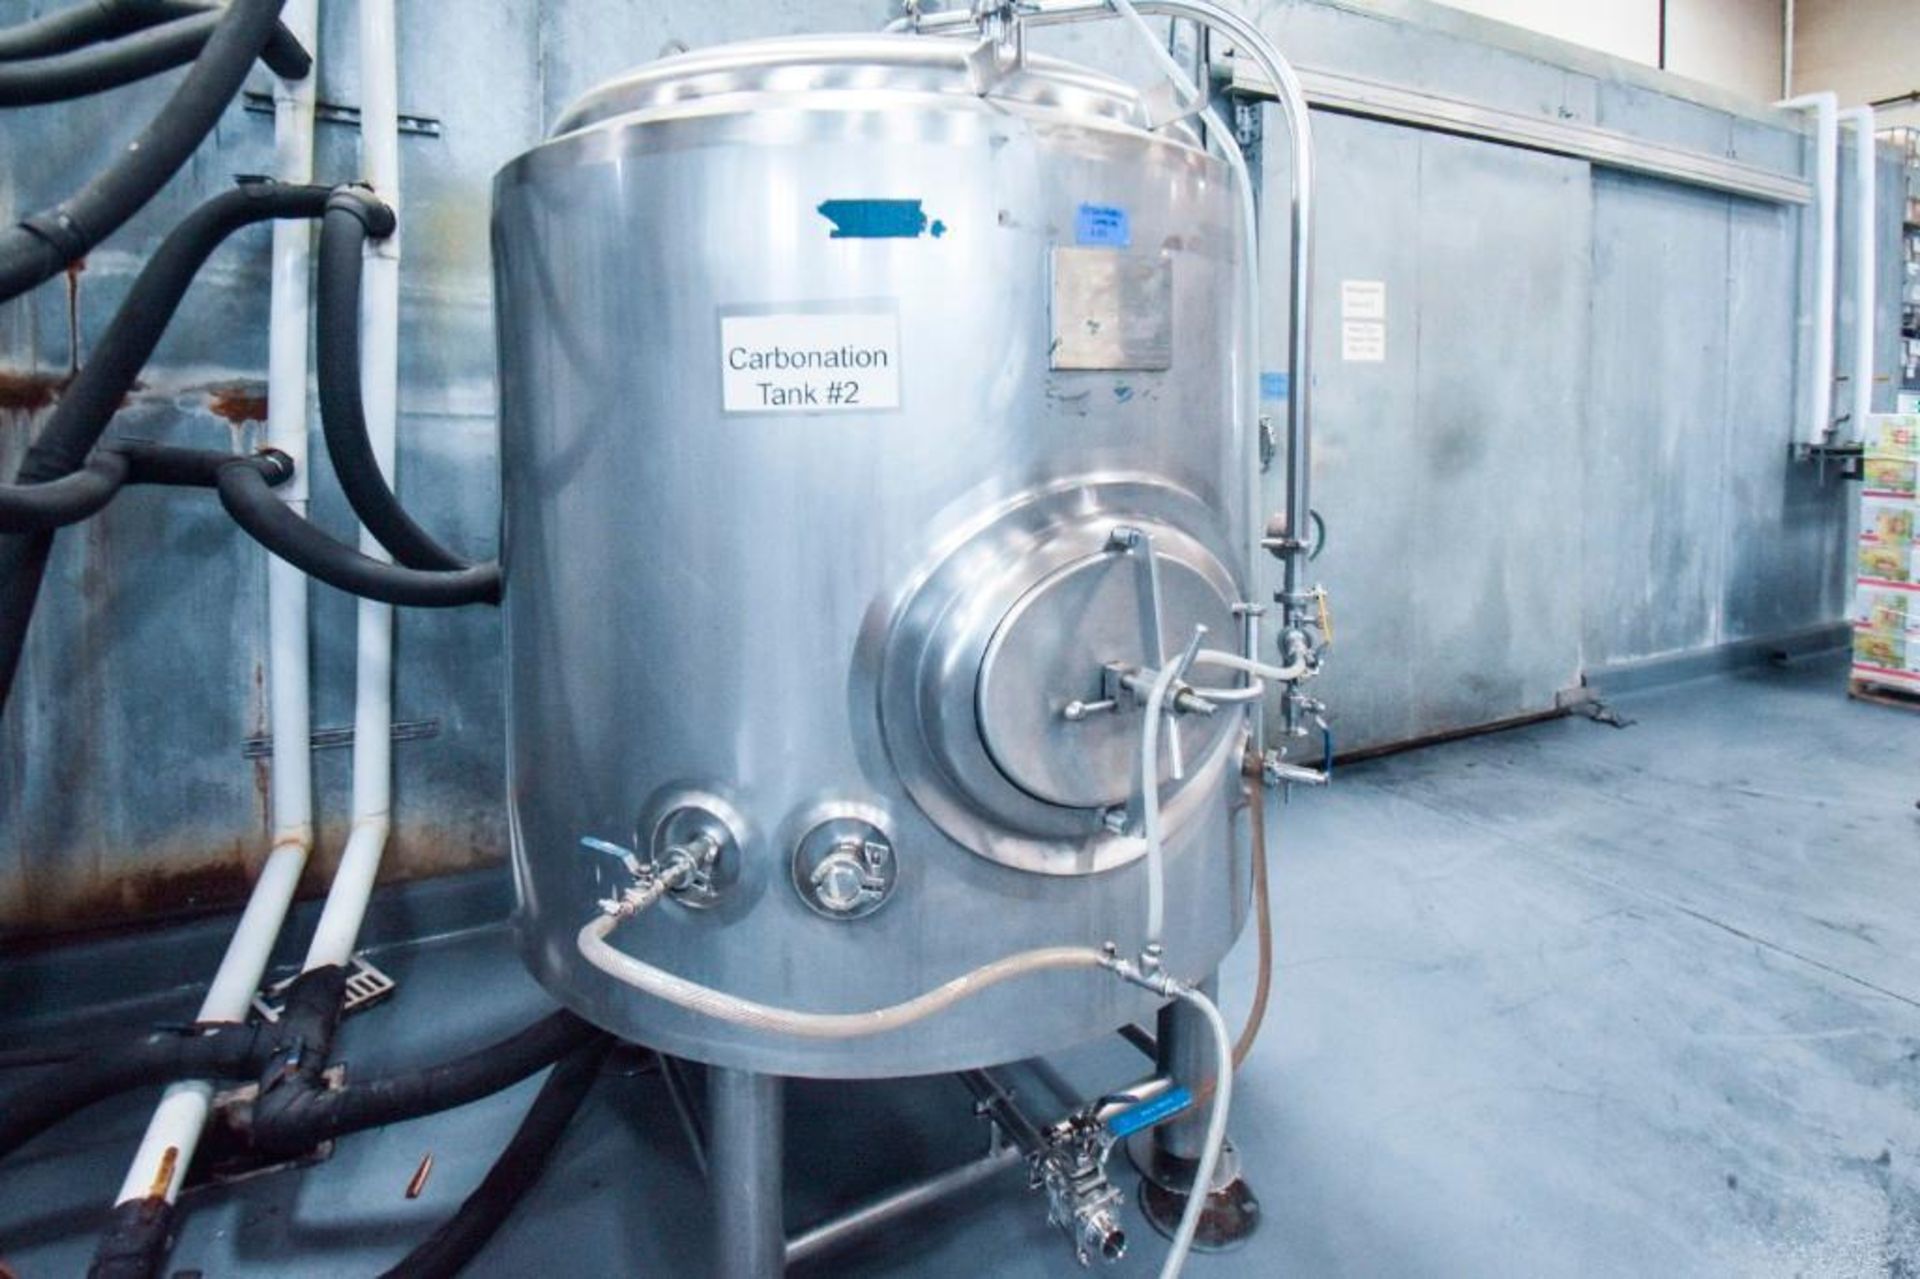 420 Gallon Stainless Steel Jacketed Carbonation Tank - Image 2 of 5